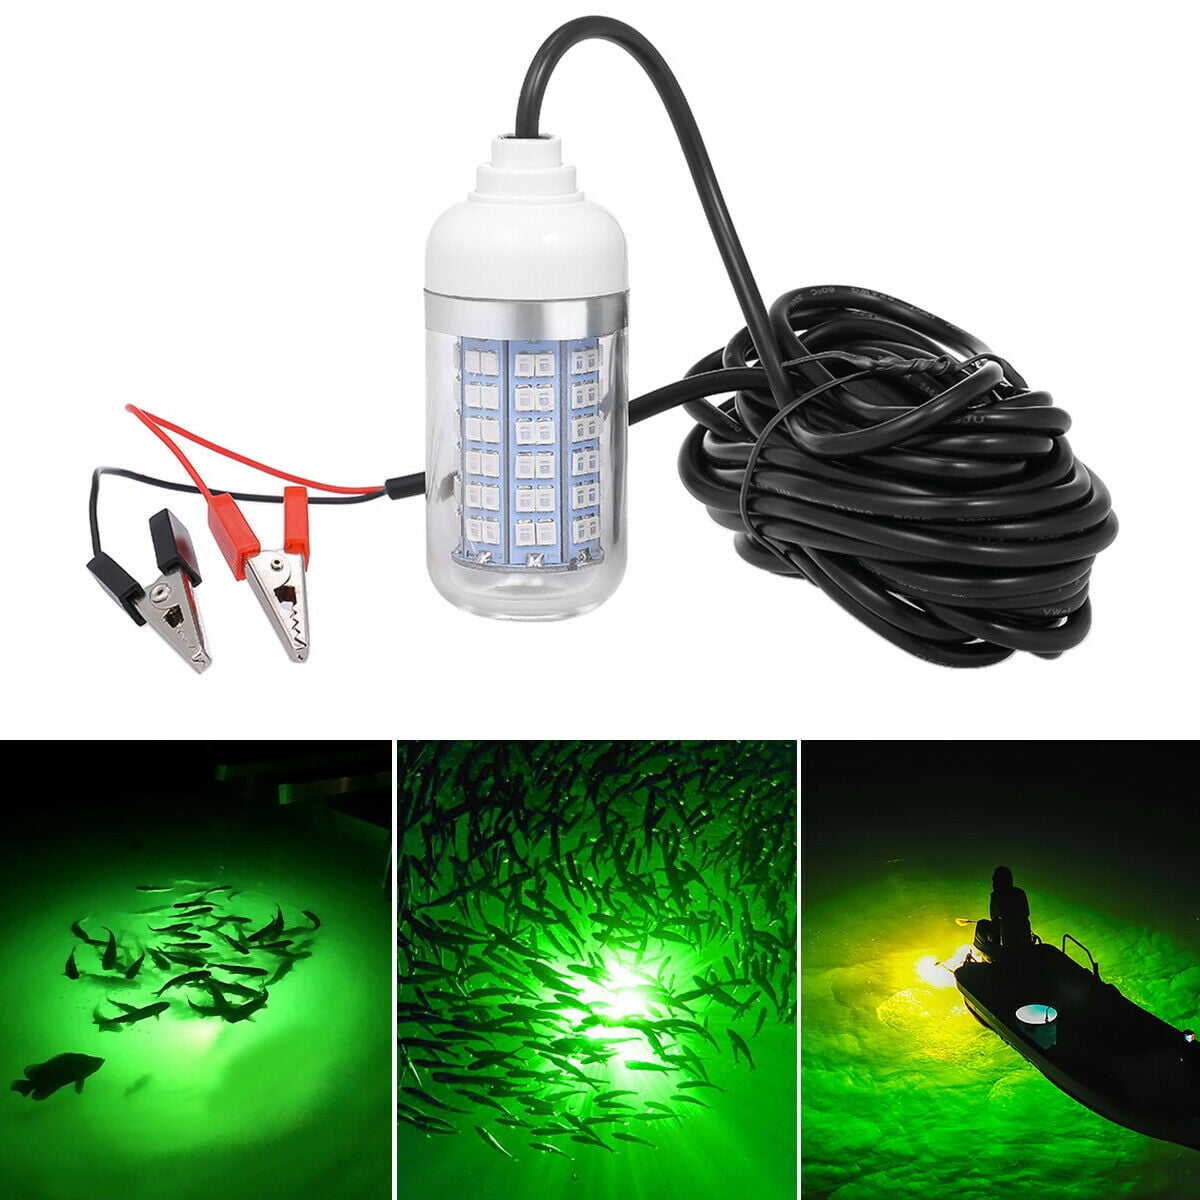 12V LED Underwater Submersible Fishing Light Green Crappie Shad Squid Lamp 